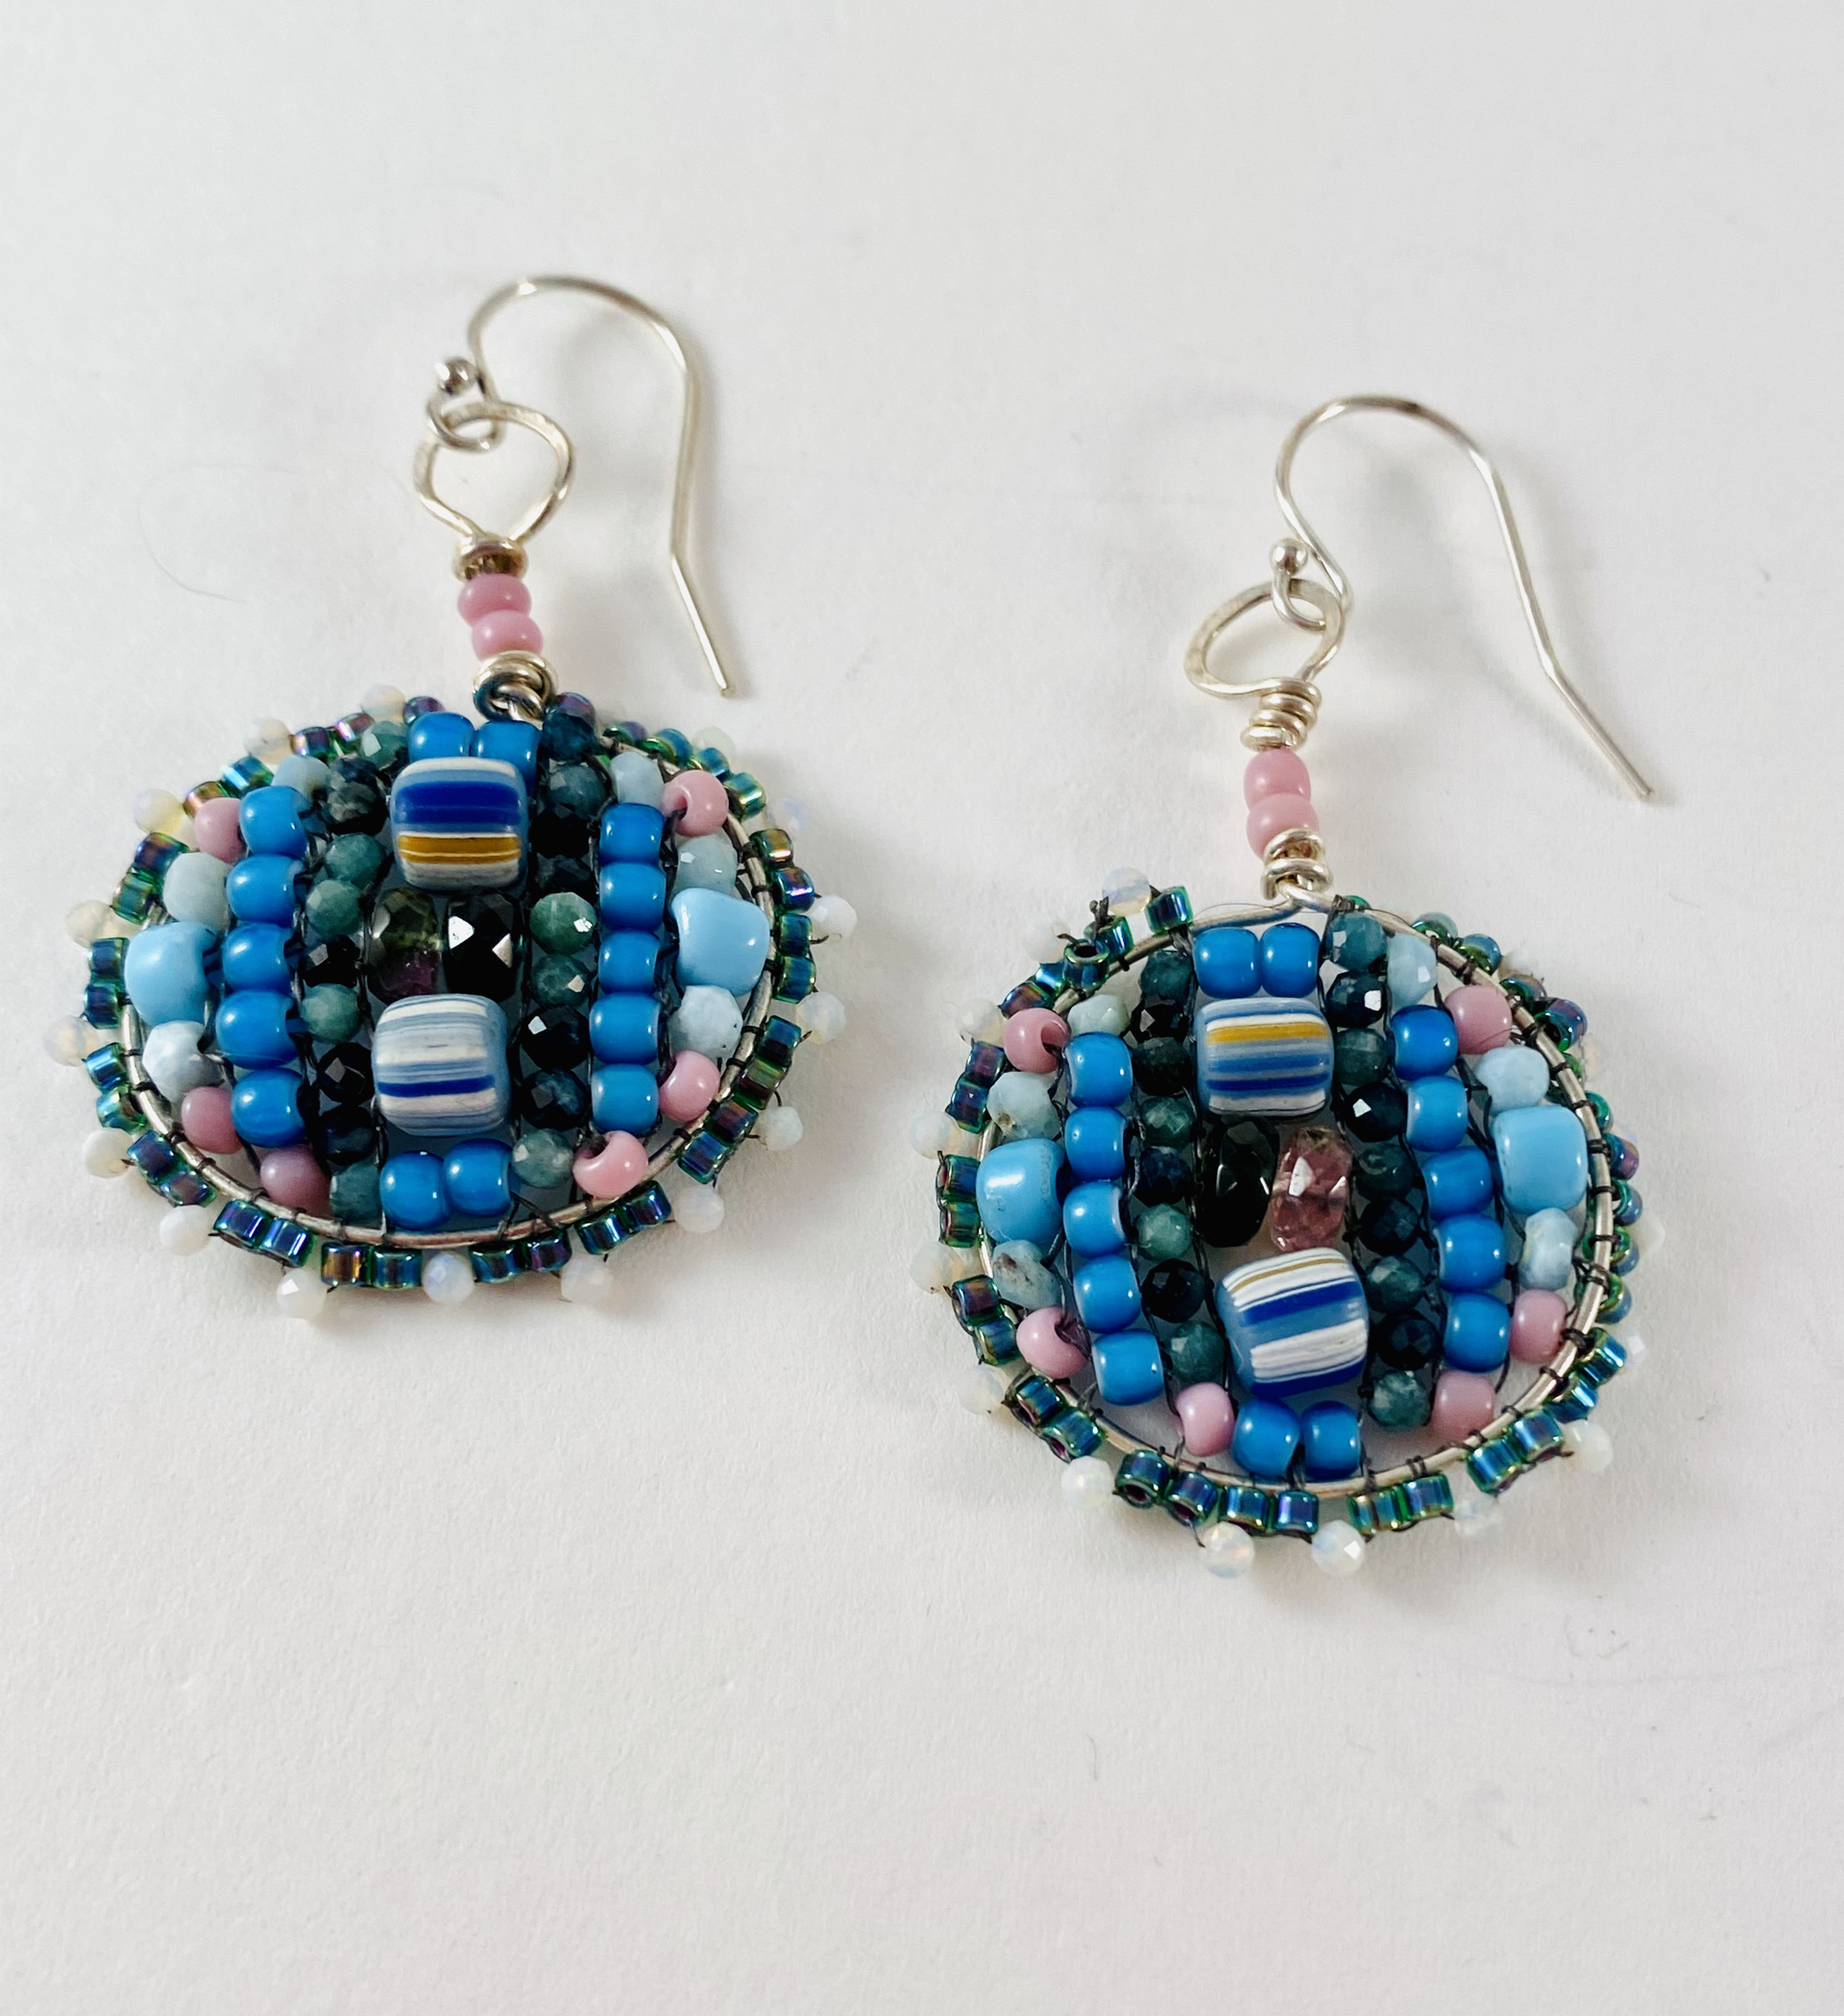 BD20 African Trade Bead Earrings by Barbara Duimstra